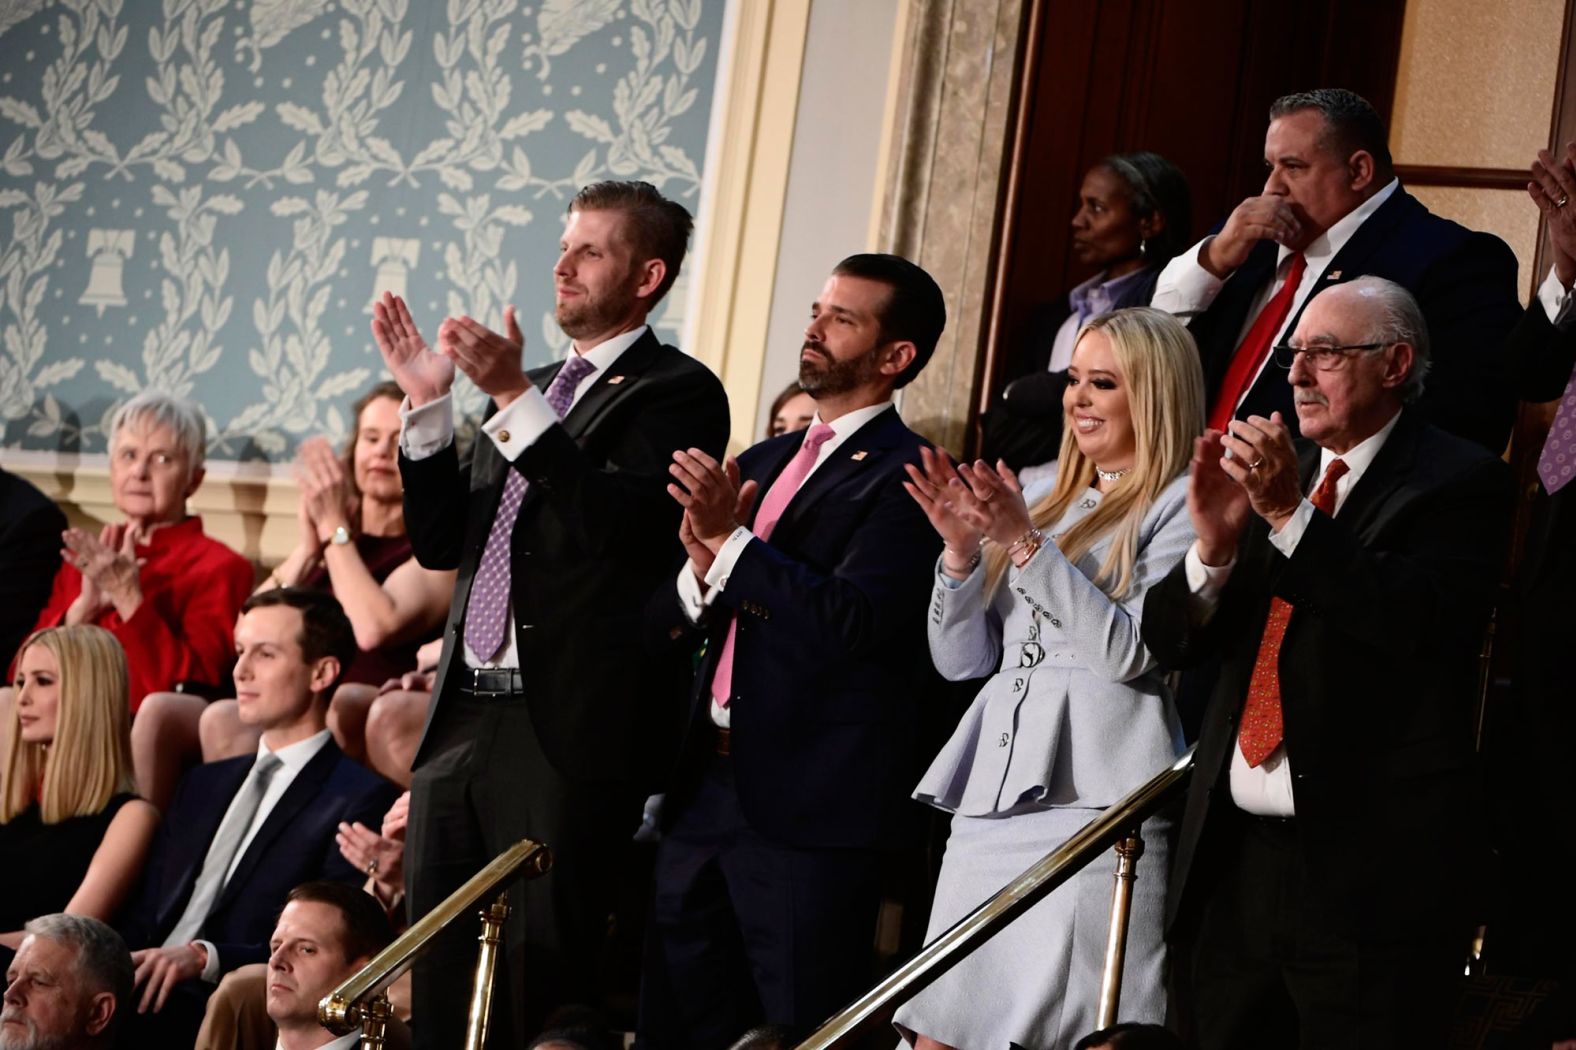 Trump's children applaud their father during the speech. From left are daughter Ivanka, son-in-law Jared Kushner, son Eric, son Donald Jr. and daughter Tiffany.